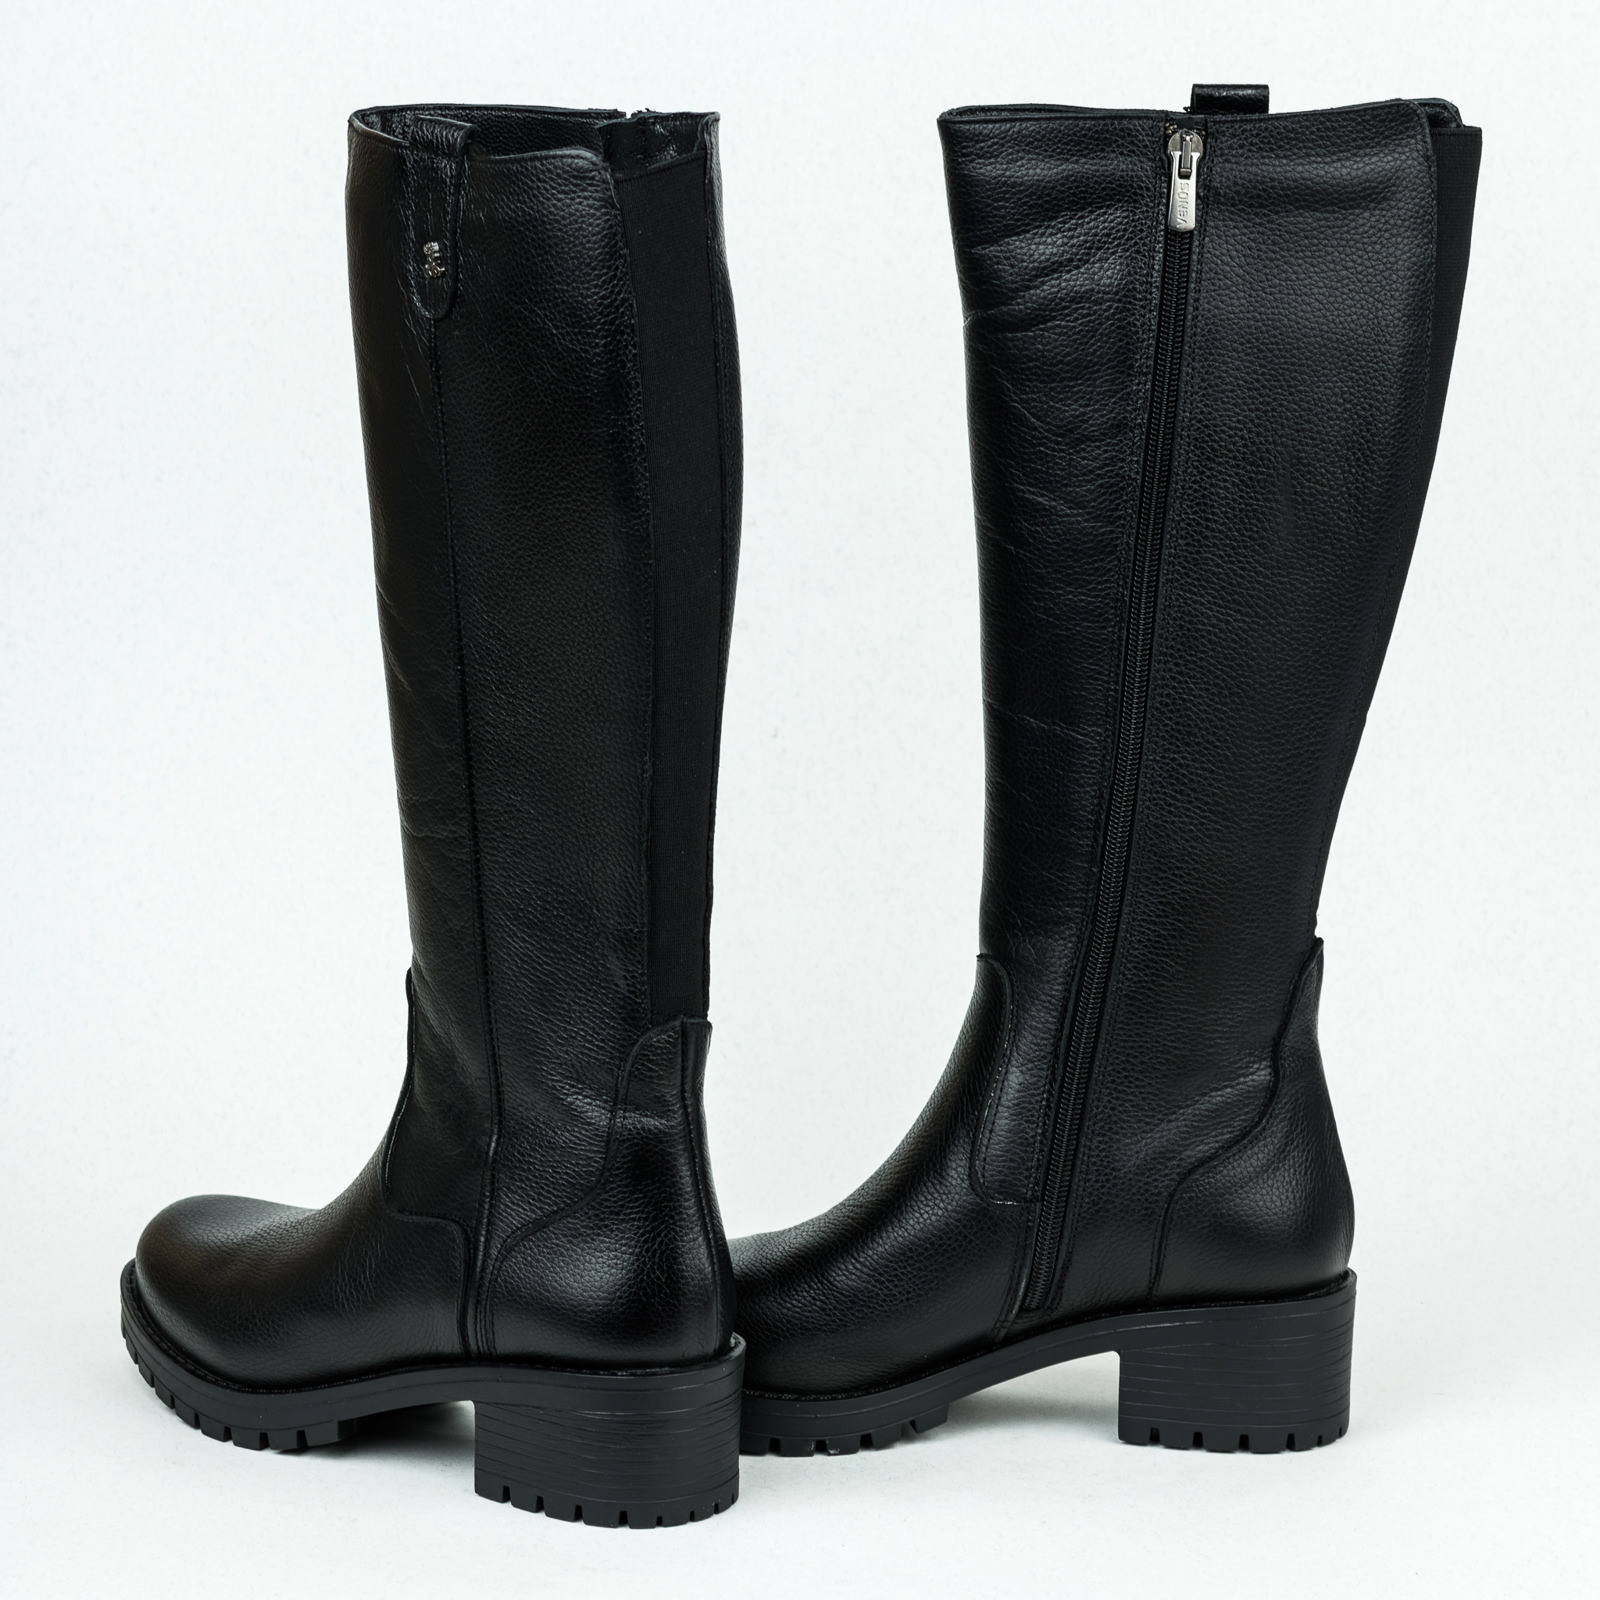 Leather boots B146 - BLACK